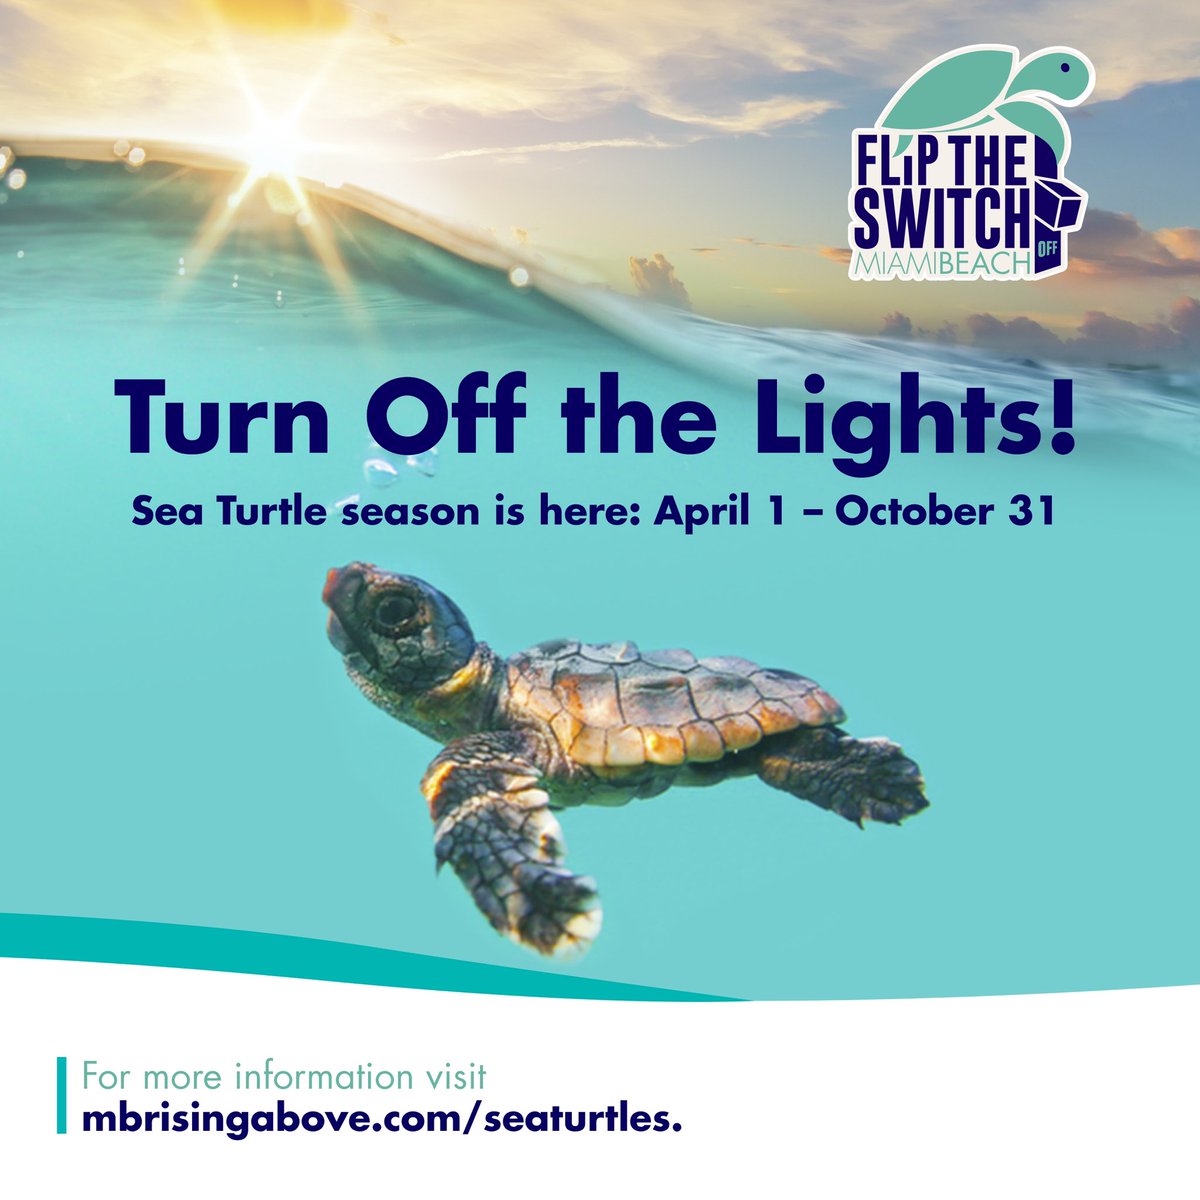 As sea turtle hatchlings make their way from sand to sea, the stark contrast between the darker dunes and the reflection of the moon over the ocean helps them determine where to go. 

Turn off the lights to help keep sea turtles safe! 

Learn more: mbrisingabove.com/seaturtles